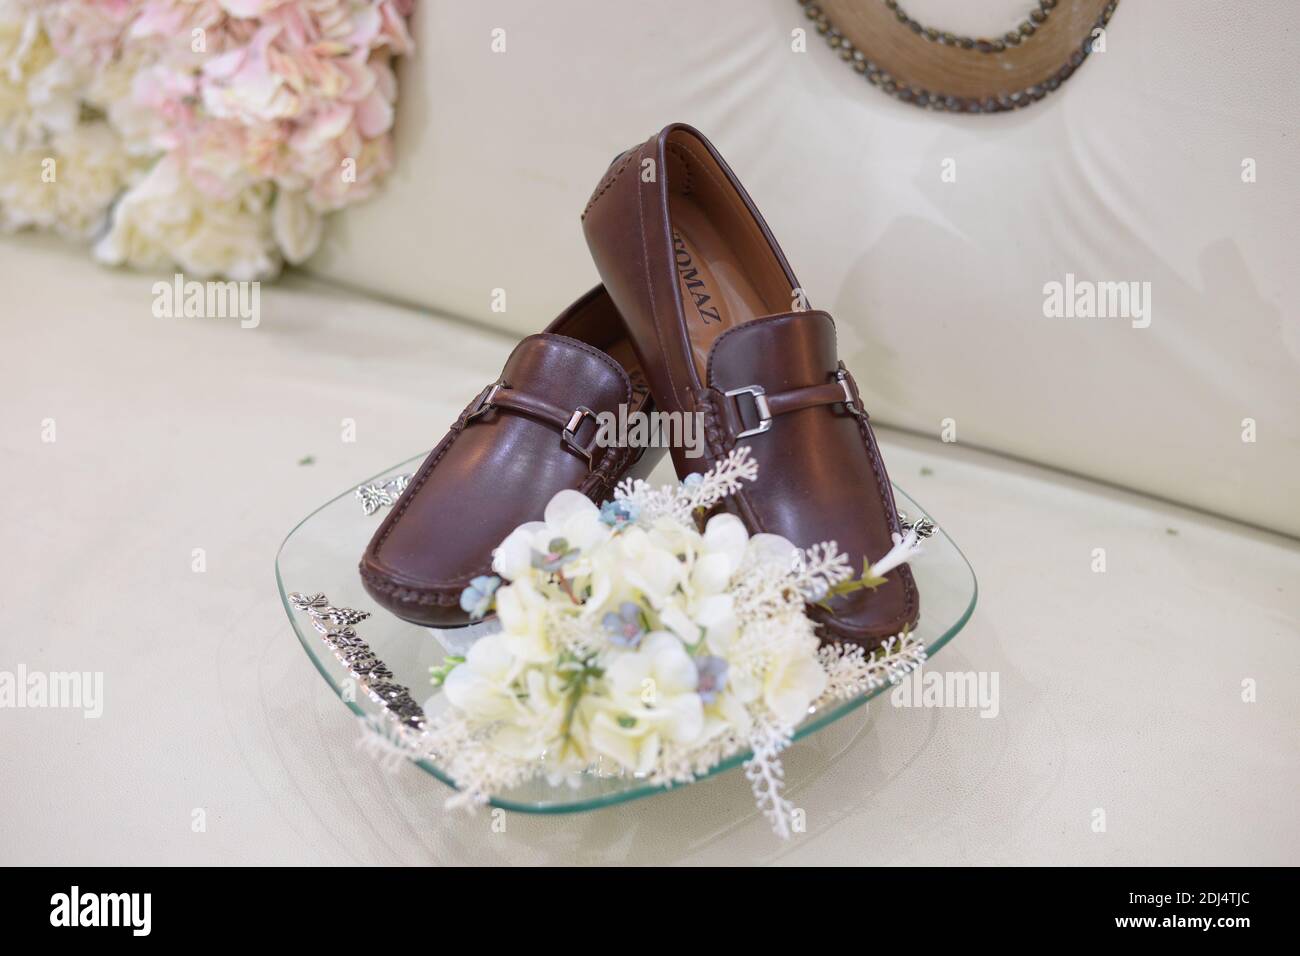 Wilmington, Delaware, U.S.A - December 1, 2020 - A pair of Tomaz brown leather shoes decorated with white hydrangea flowers for wedding gift Stock Photo